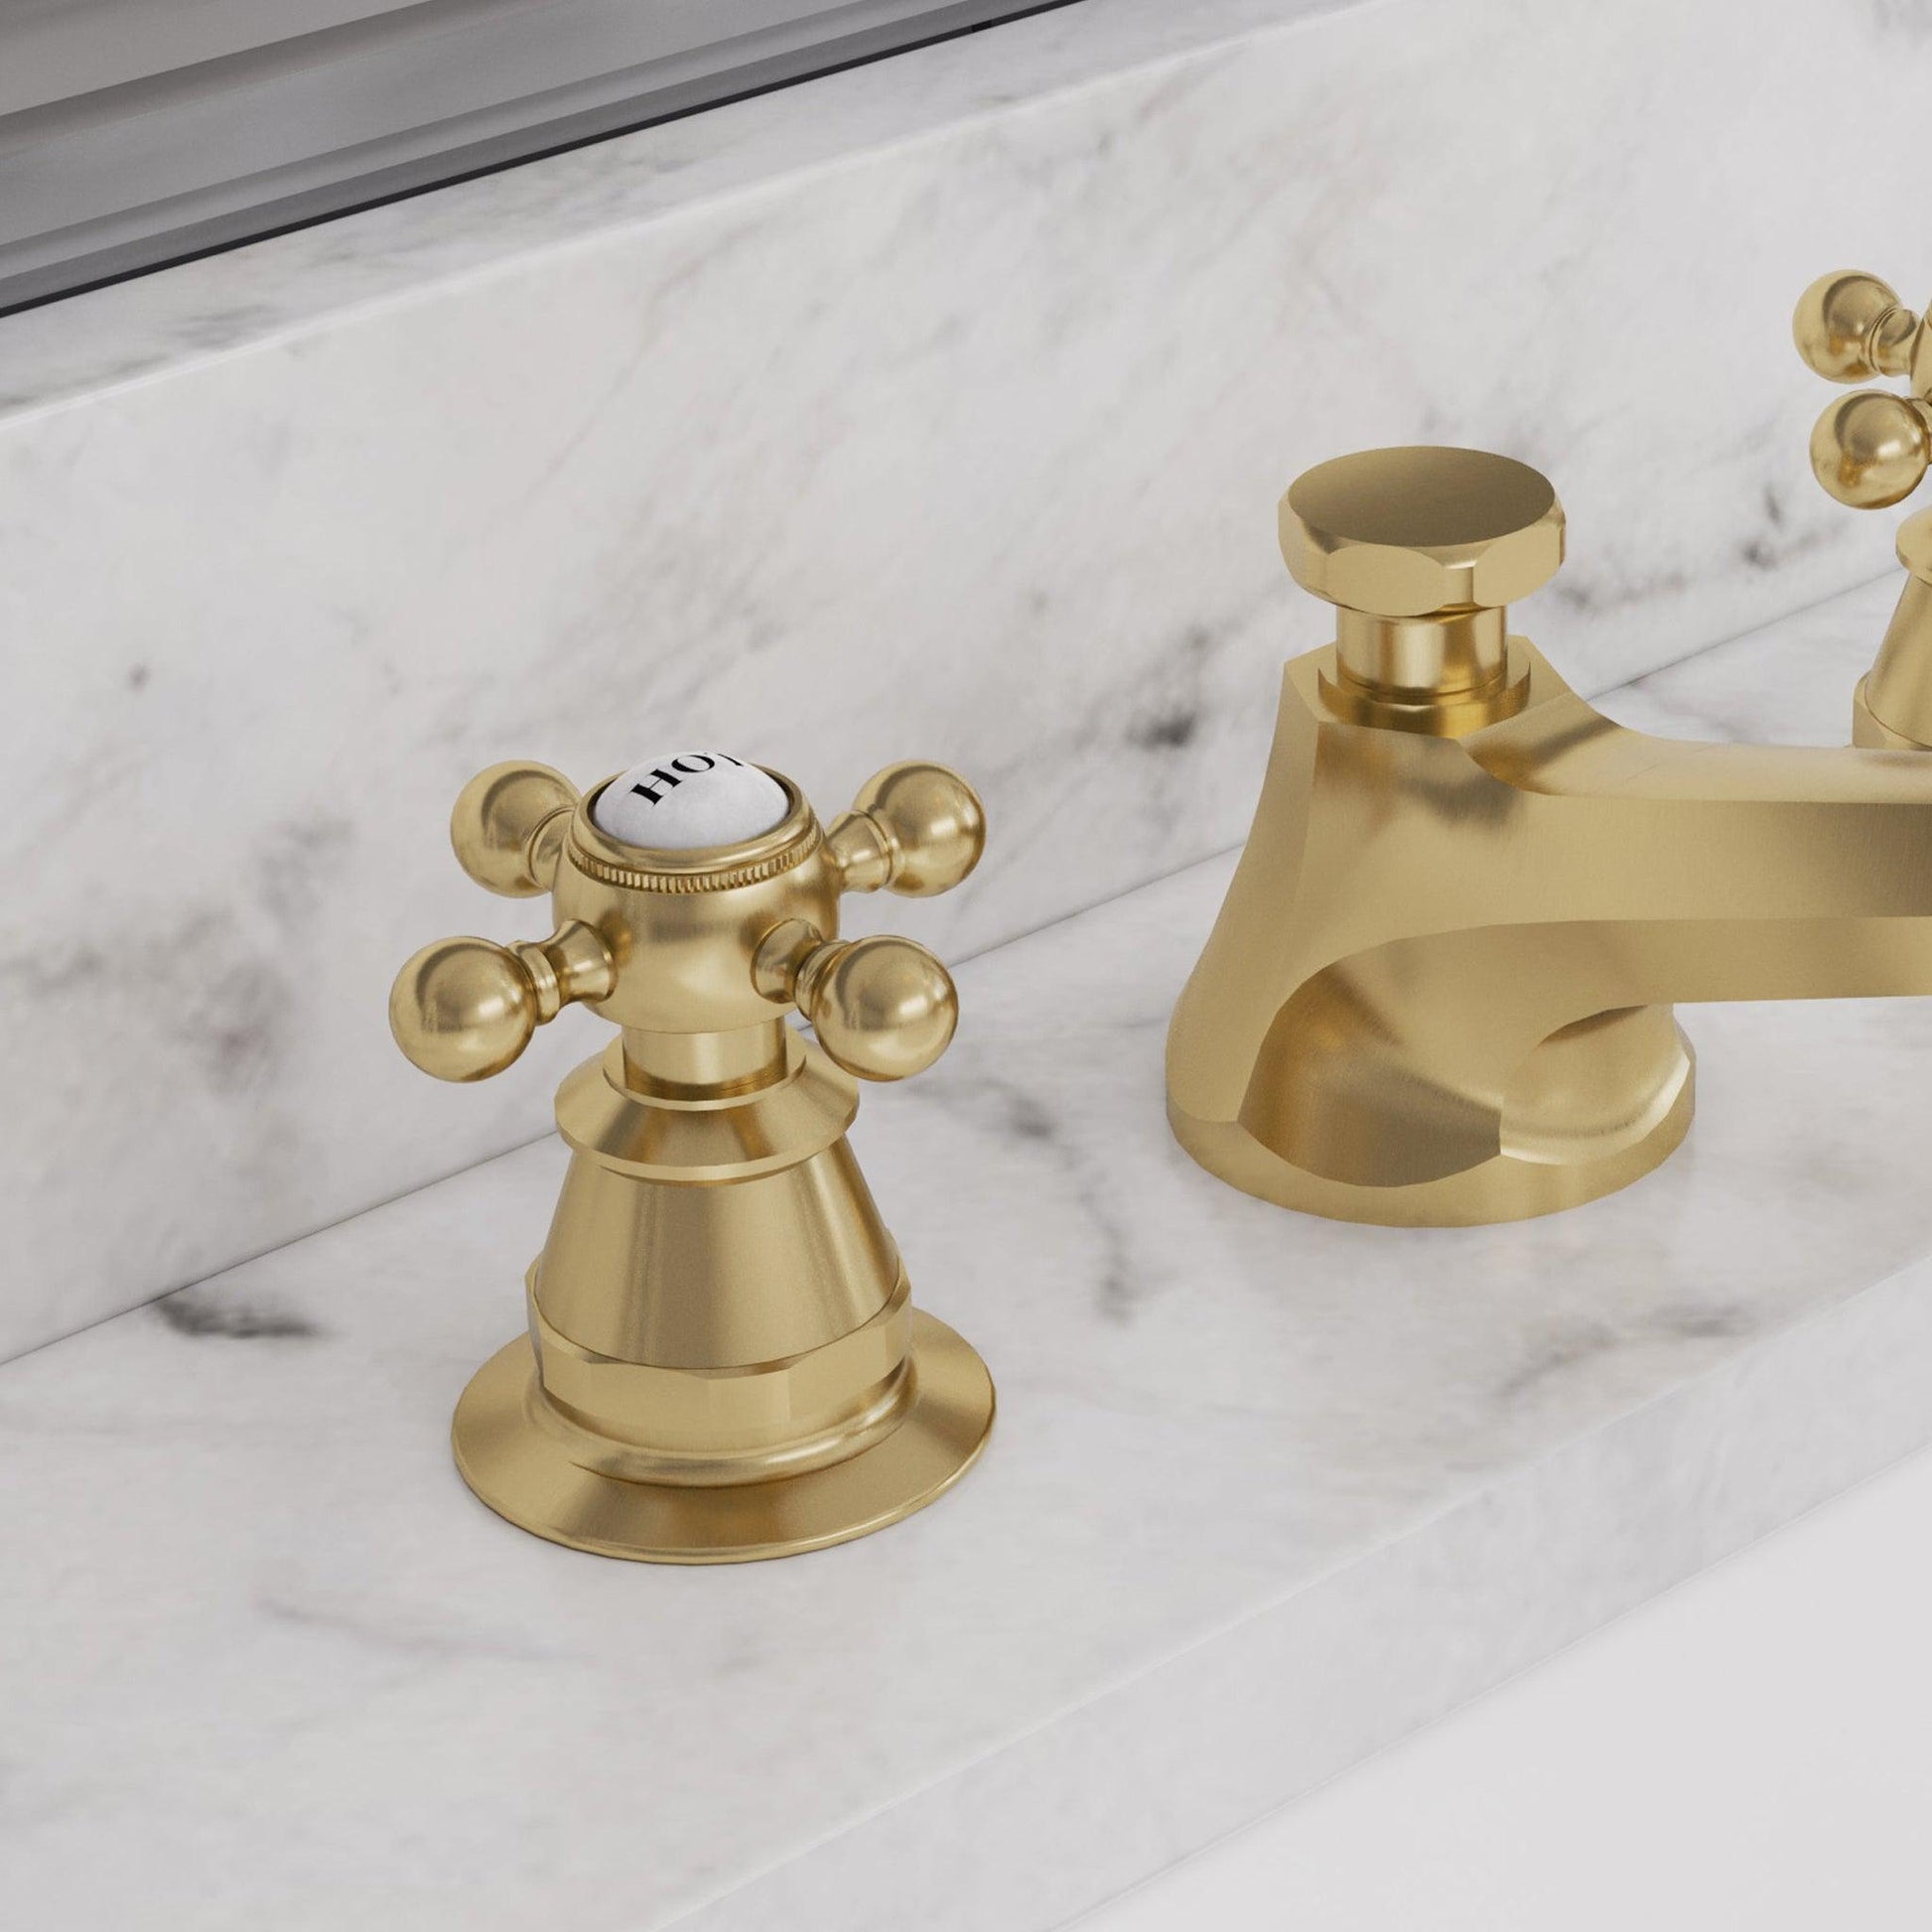 Water Creation American 20th Century Classic Widespread Lavatory F2-0009 8" Gold Solid Brass Faucet With Pop-Up Drain And Metal Cross Handles, Hot And Cold Labels Included